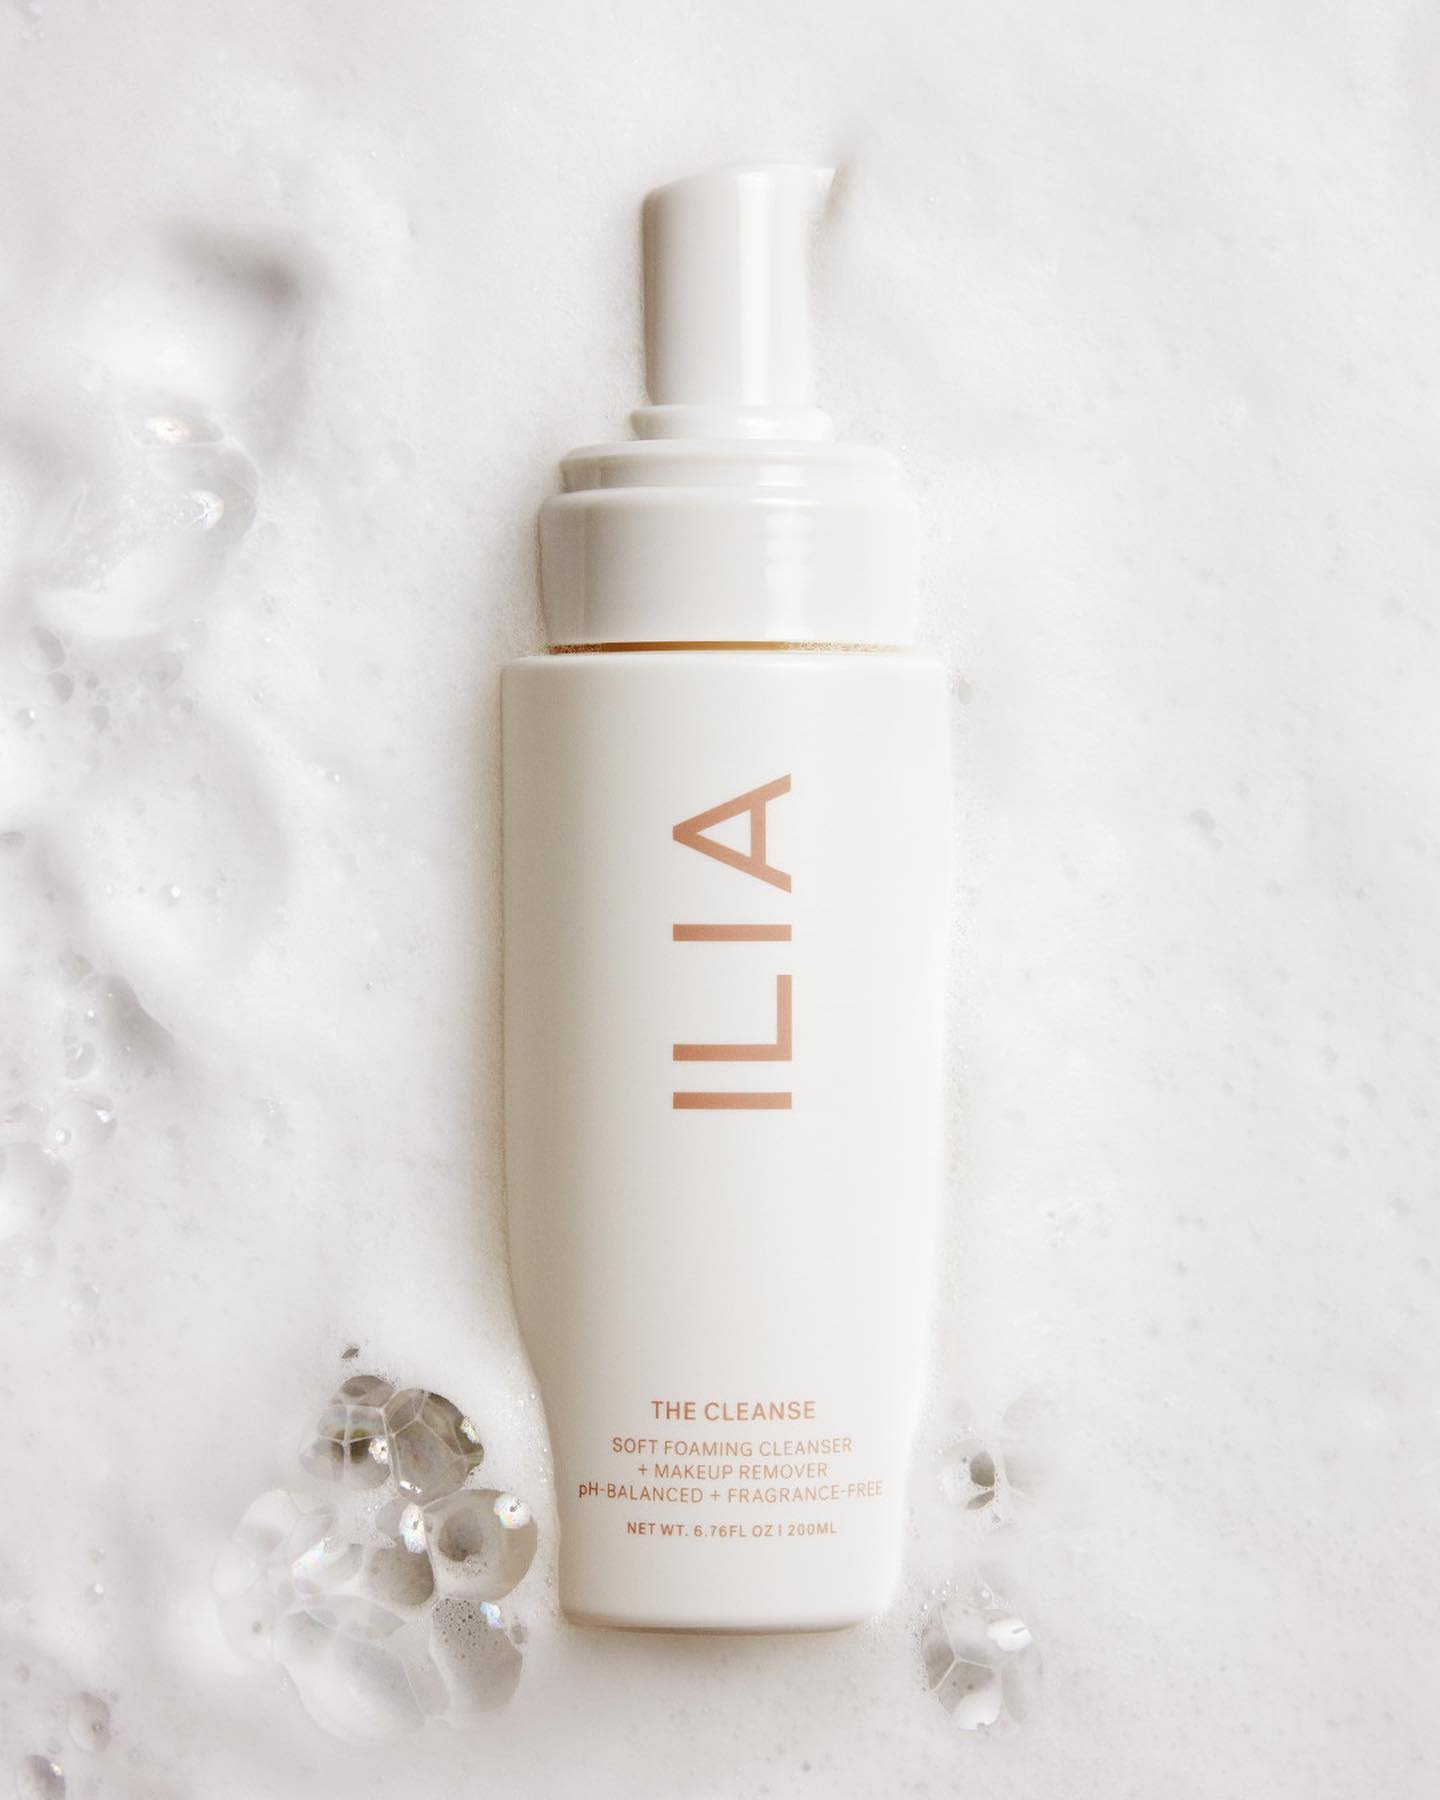 Ilia Beauty The Cleanse Soft Foaming Cleanser + Make Up Remover